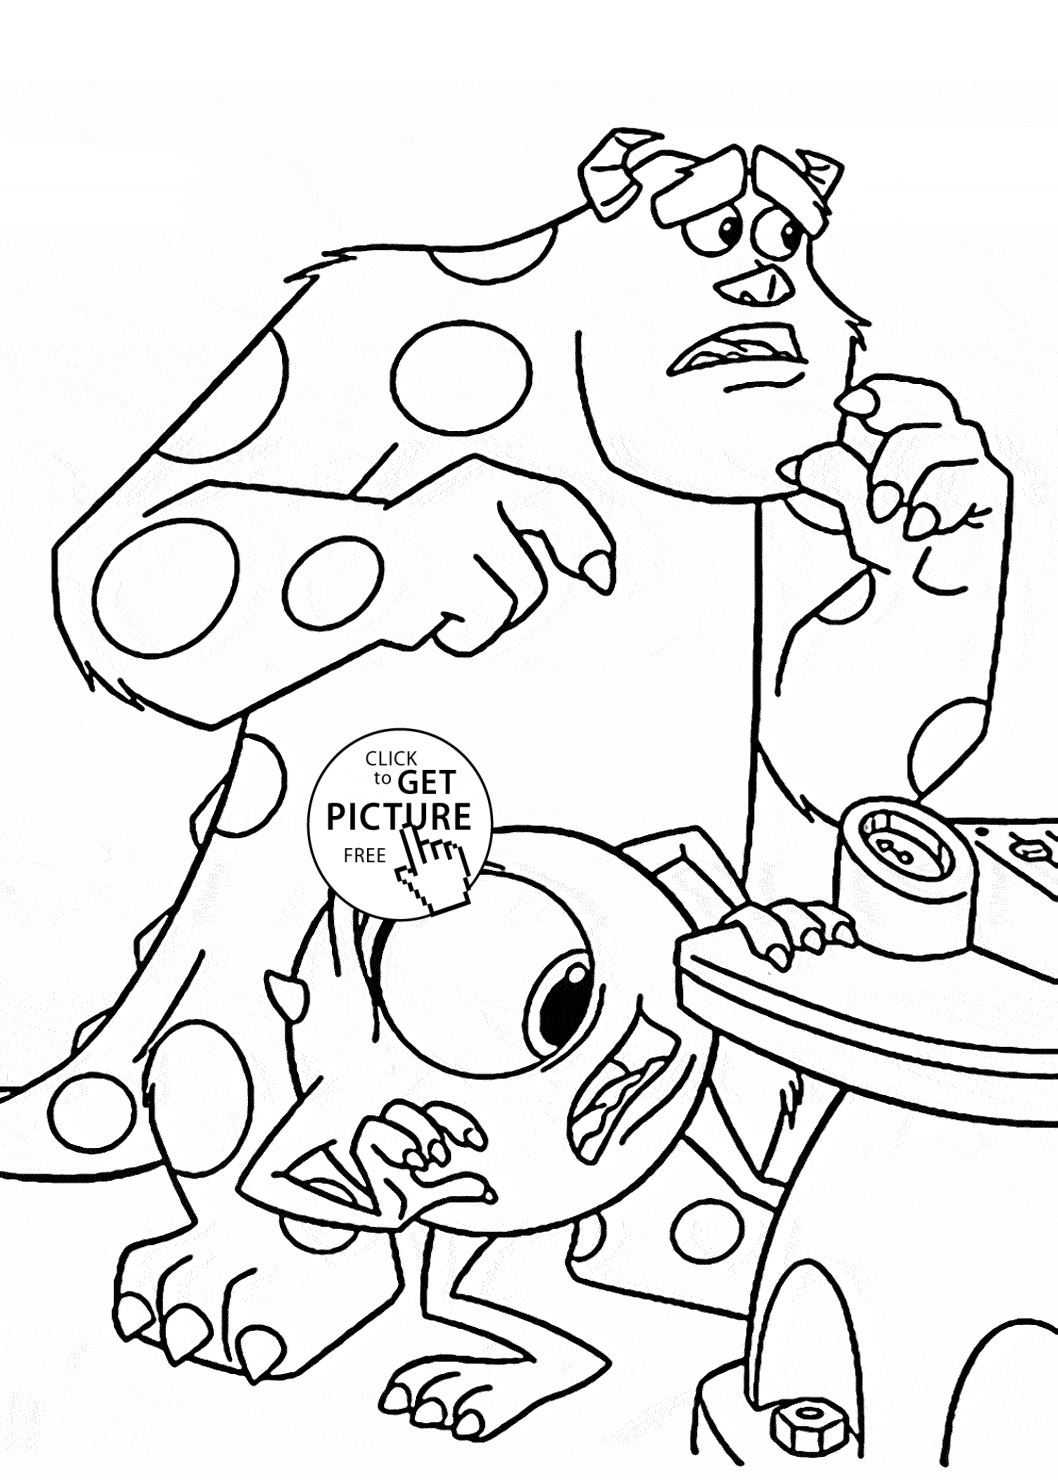 Disney Coloring Pages For Toddlers - Coloring Home